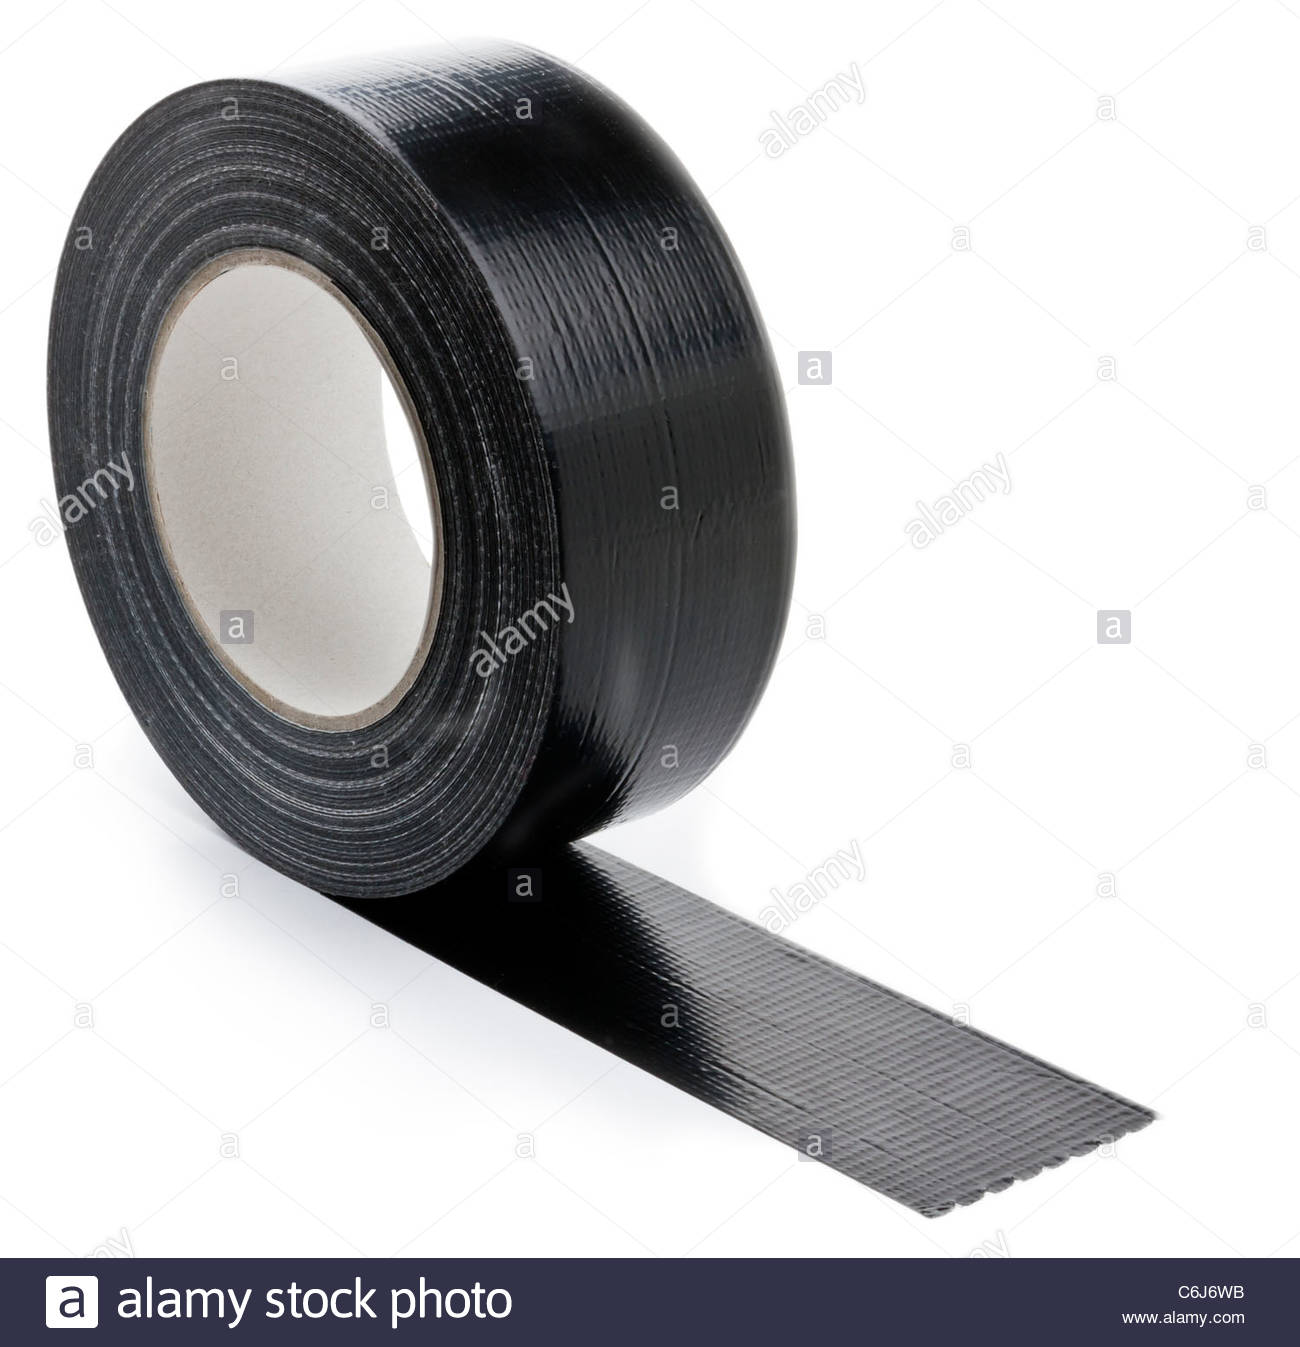 Black Adhesive Tape On Light Background Partly Unroled Stock